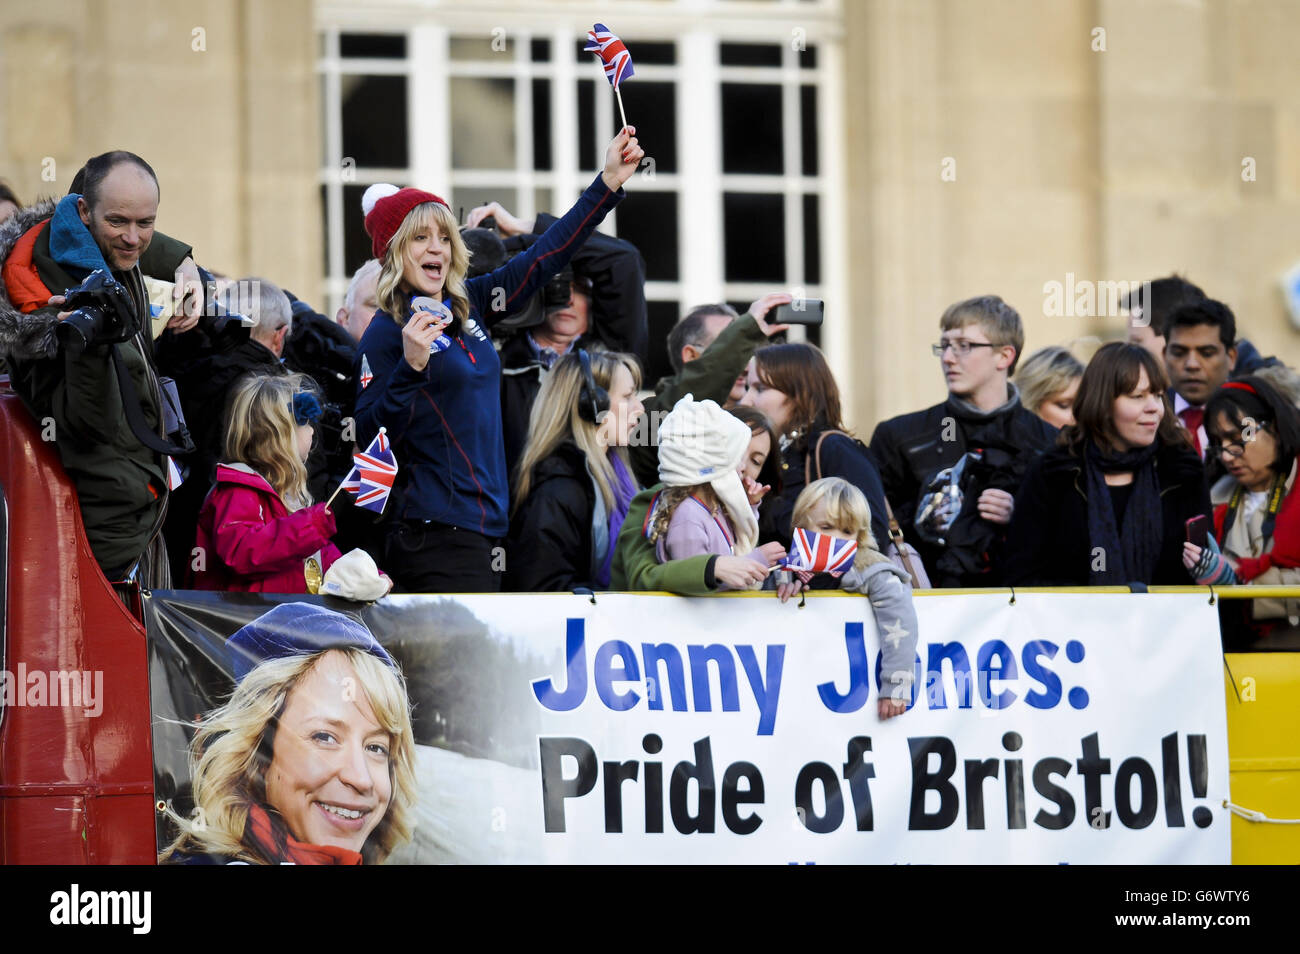 Olympic bronze medal winner Jenny Jones' open-top bus tour of Bristol arrives the city hall, following her third place finish in the snowboard slopestyle event at the Winter Olympics in Sochi, Russia. Stock Photo